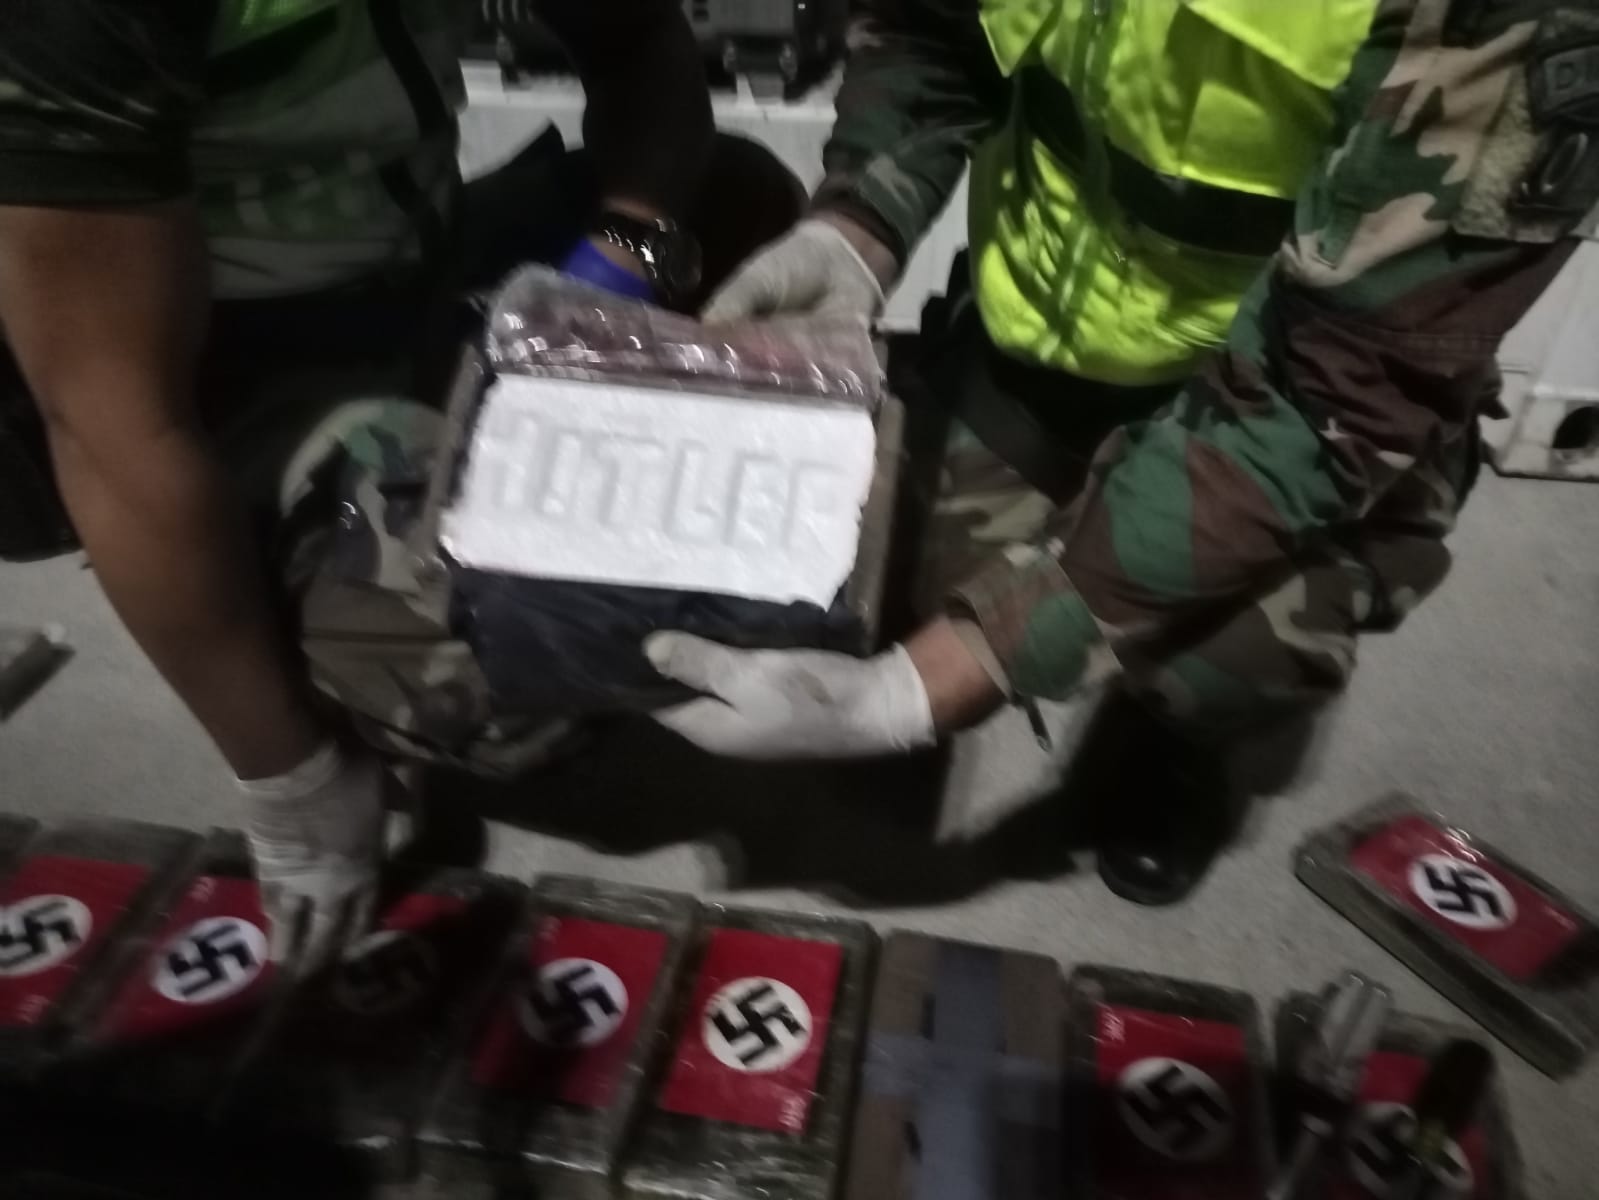 Peru Seizes Cocaine in Packages with Hitler’s Name and Nazi Flag on Them